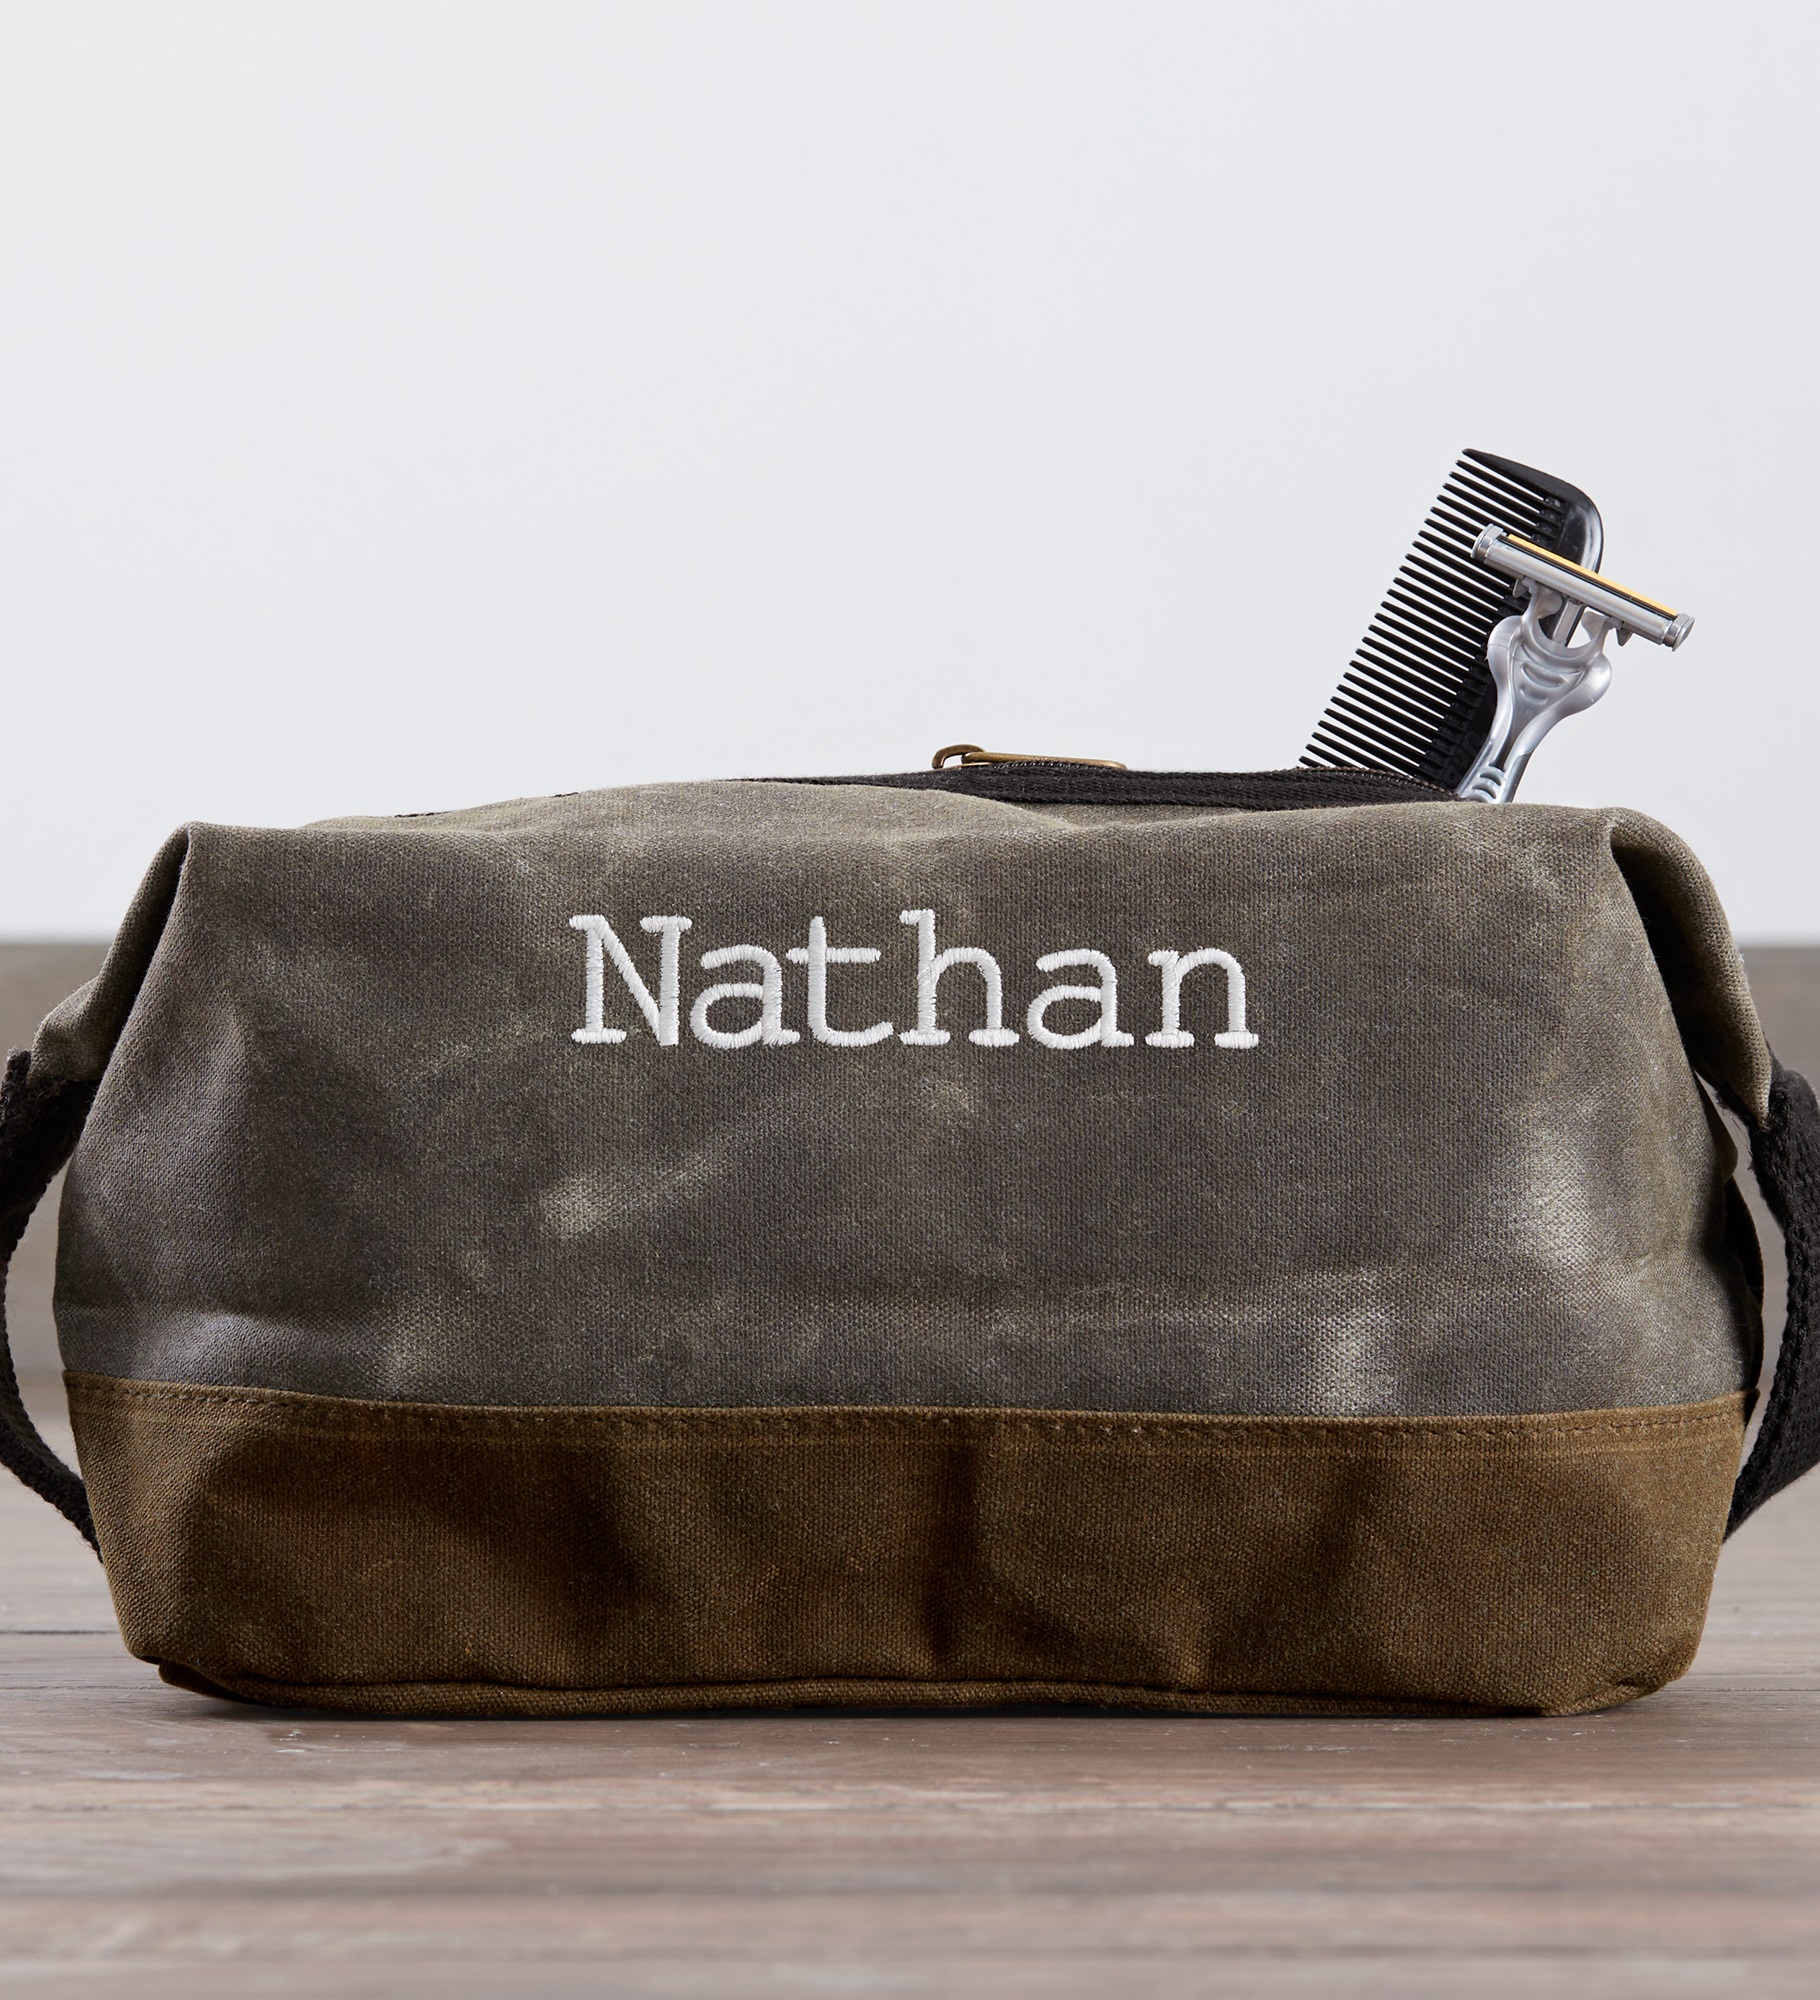 Embroidered Olive Waxed Canvas Travel Toiletry Bag